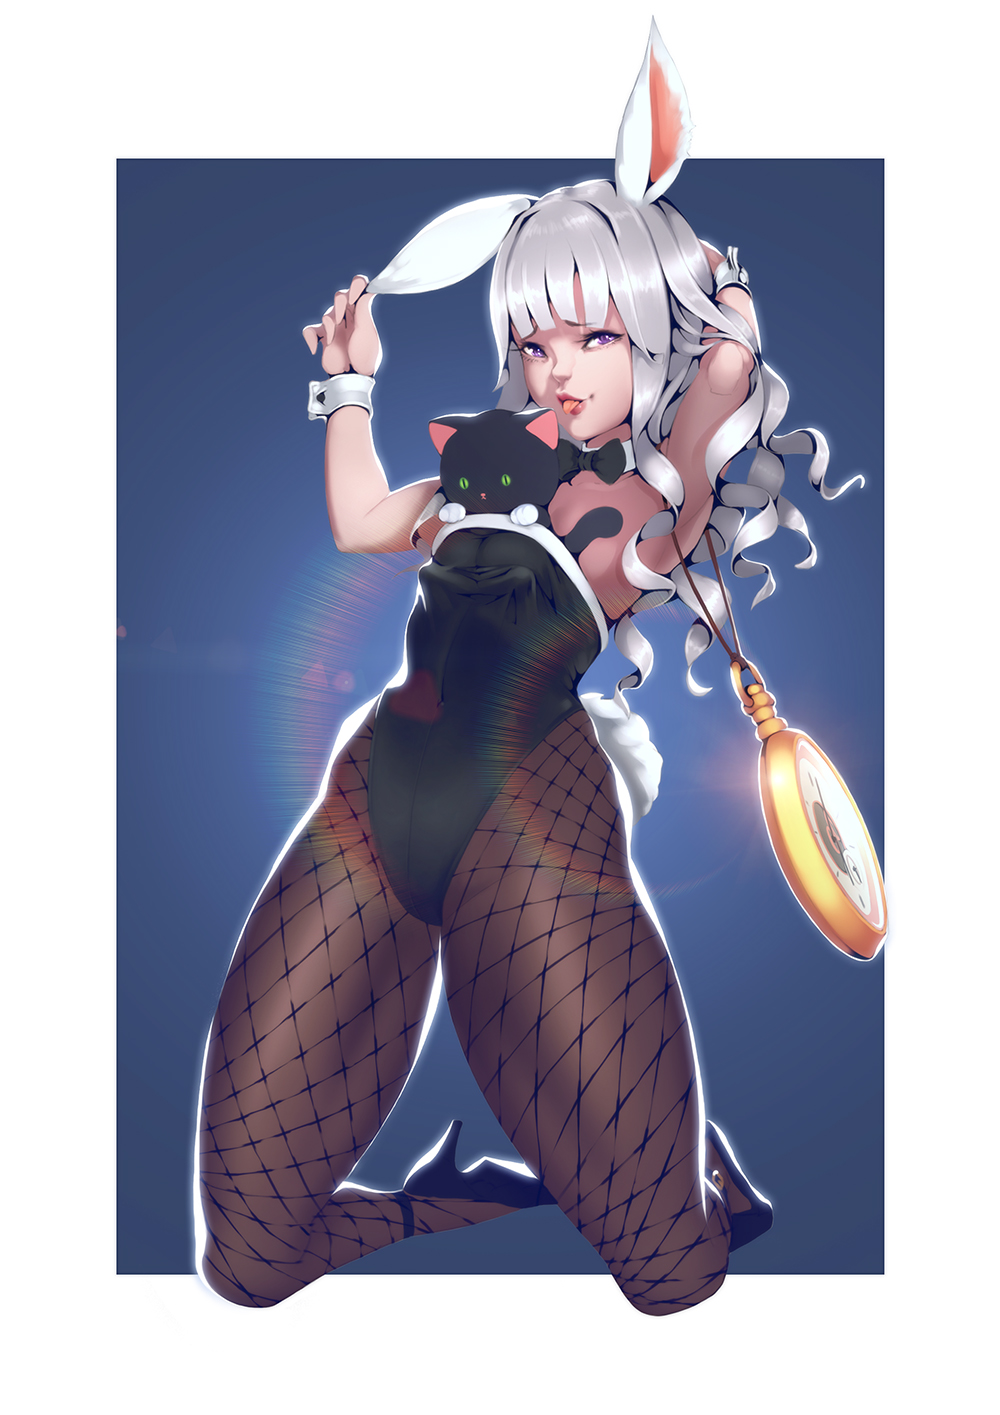 tera-online-elin-pantyhose-thick-thighs-anime-girl-black-tights-bunny-ears